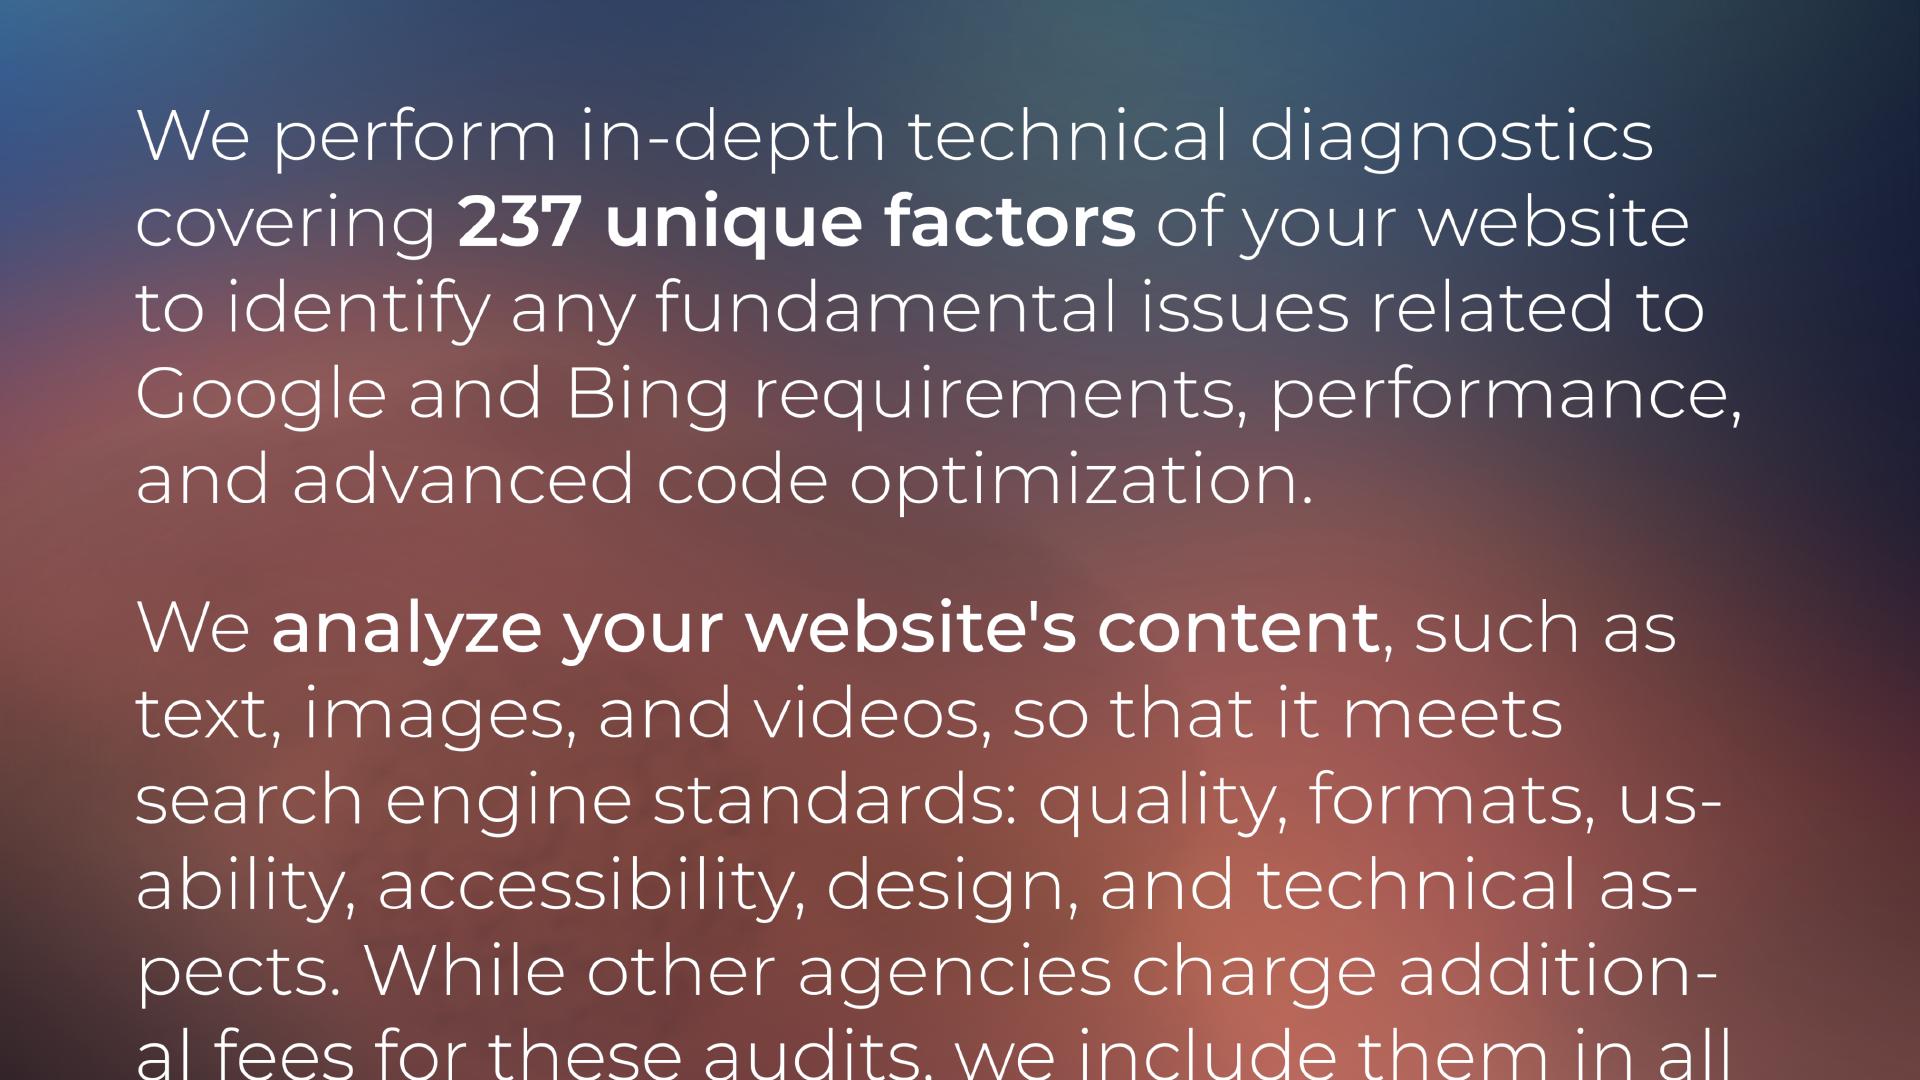 We perform in-depth technical diagnostics covering 237 unique factors of your website to identify any fundamental issues related to Google and Bing requirements, performance, and advanced code optimization. We analyze your website's content, such as text, images, and videos, so that it meets search engine standards: quality, formats, usability, accessibility, design, and technical aspects. While other agencies charge additional fees for these audits, we include them in ...